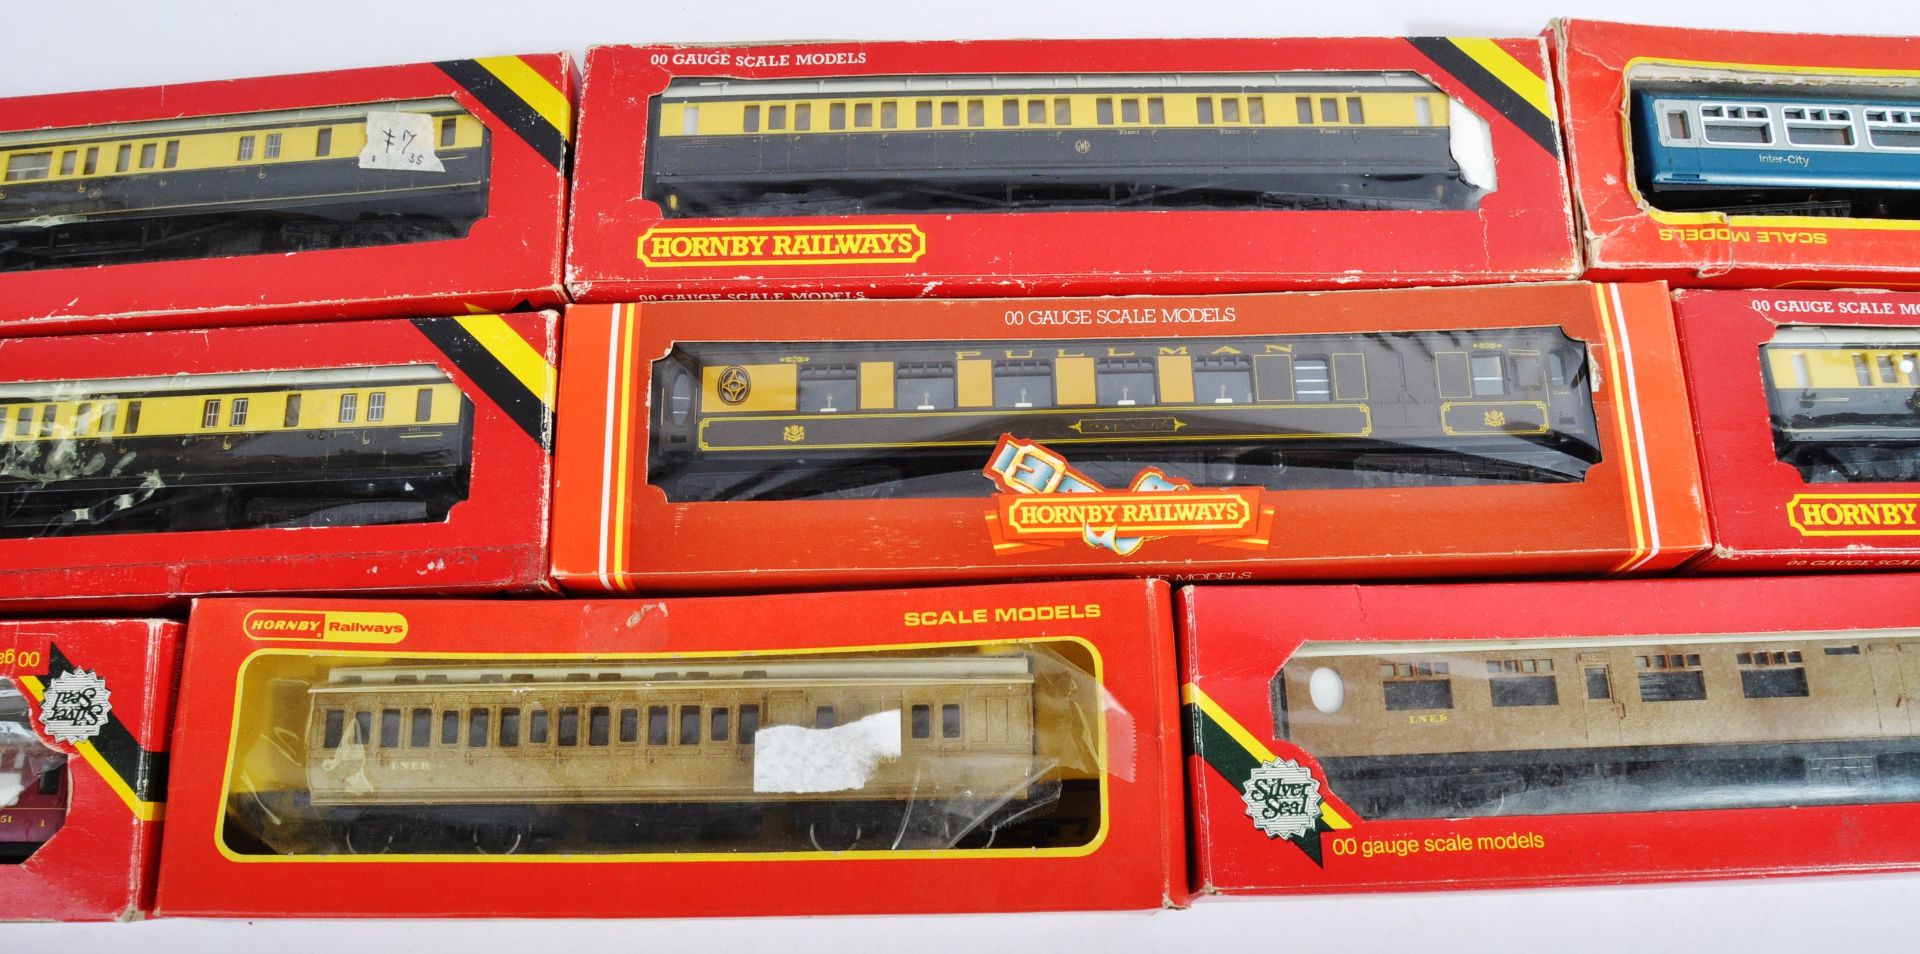 COLLECTION OF HORNBY 00 GAUGE MODEL RAILWAY CARRIAGES - Image 3 of 4